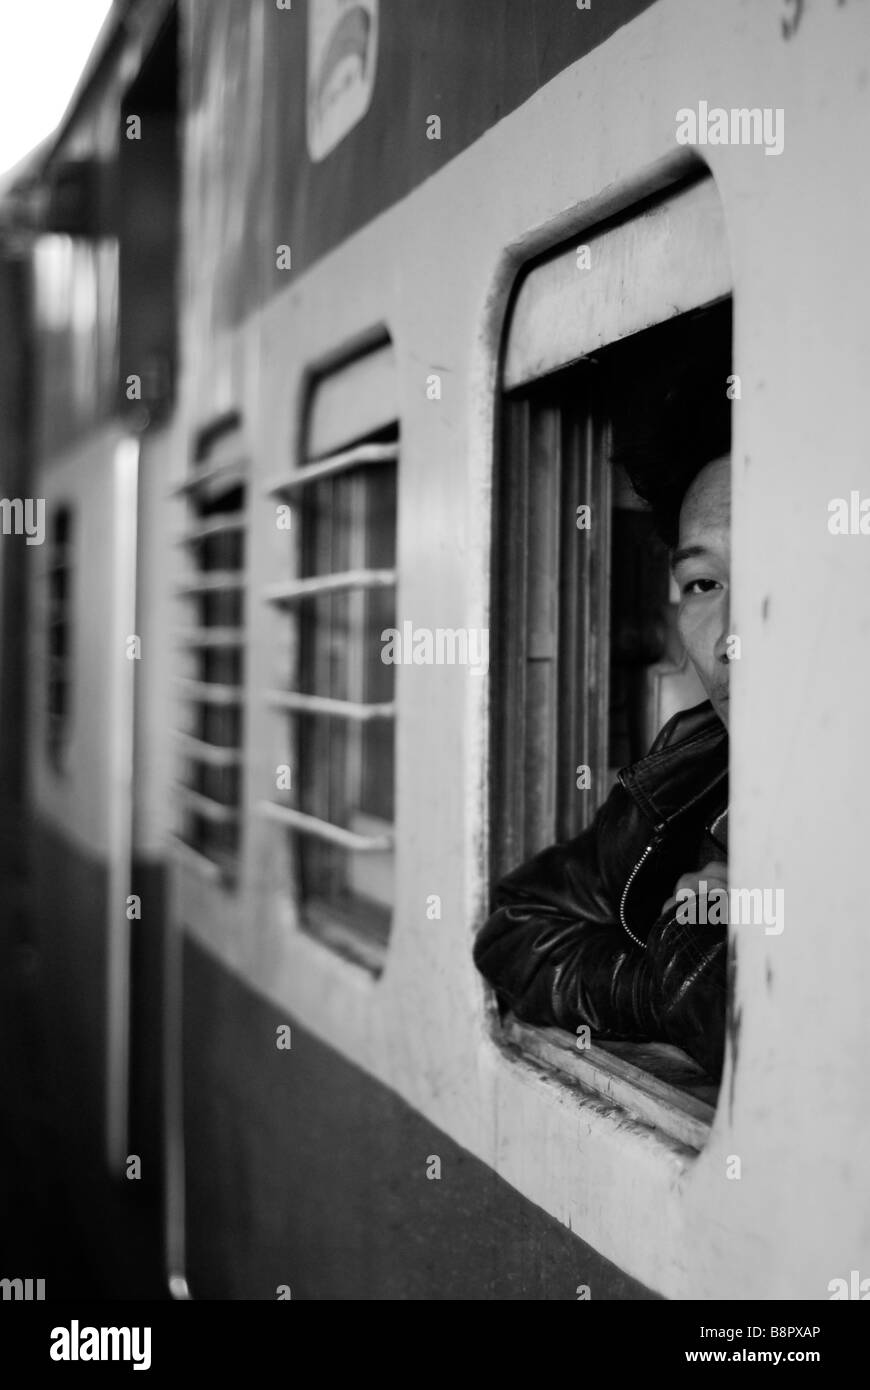 Indian man looking out of a train window, India Stock Photo